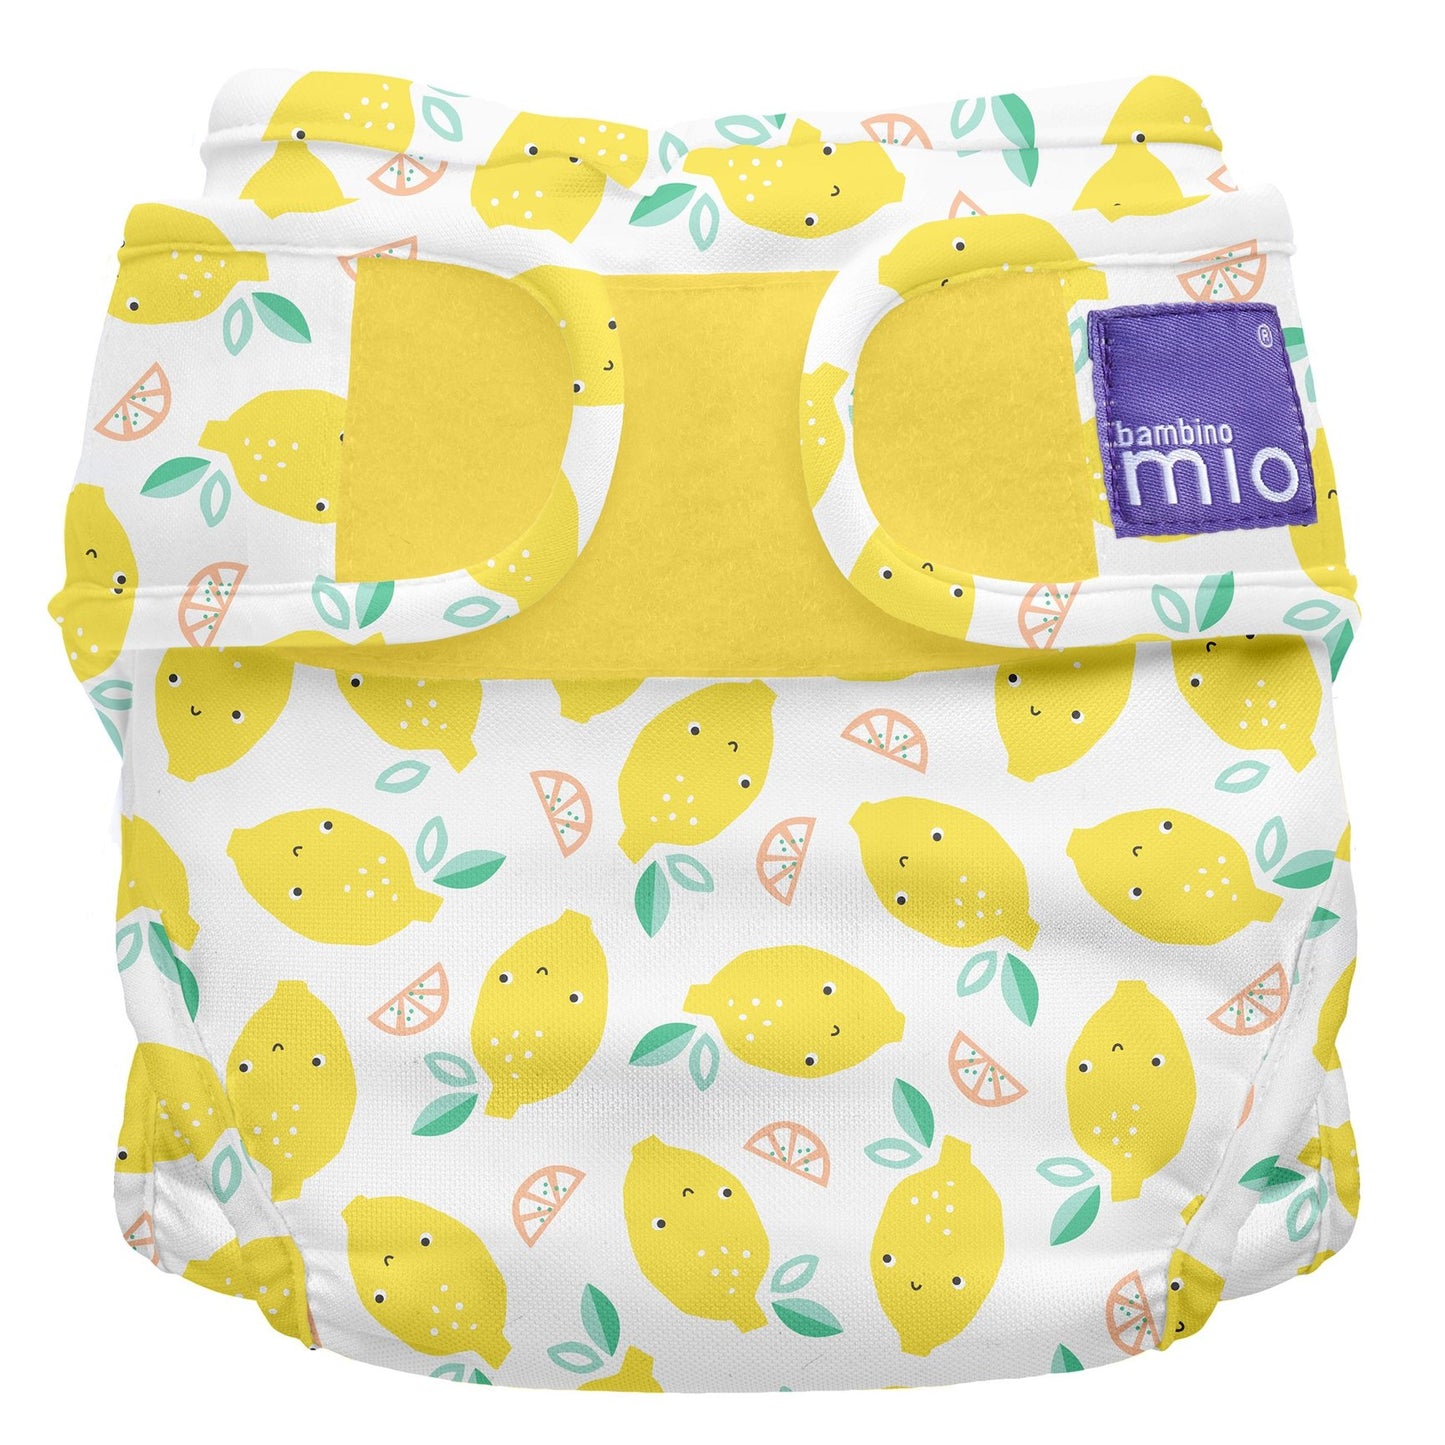 MioDuo Nappy Cover: Size 2